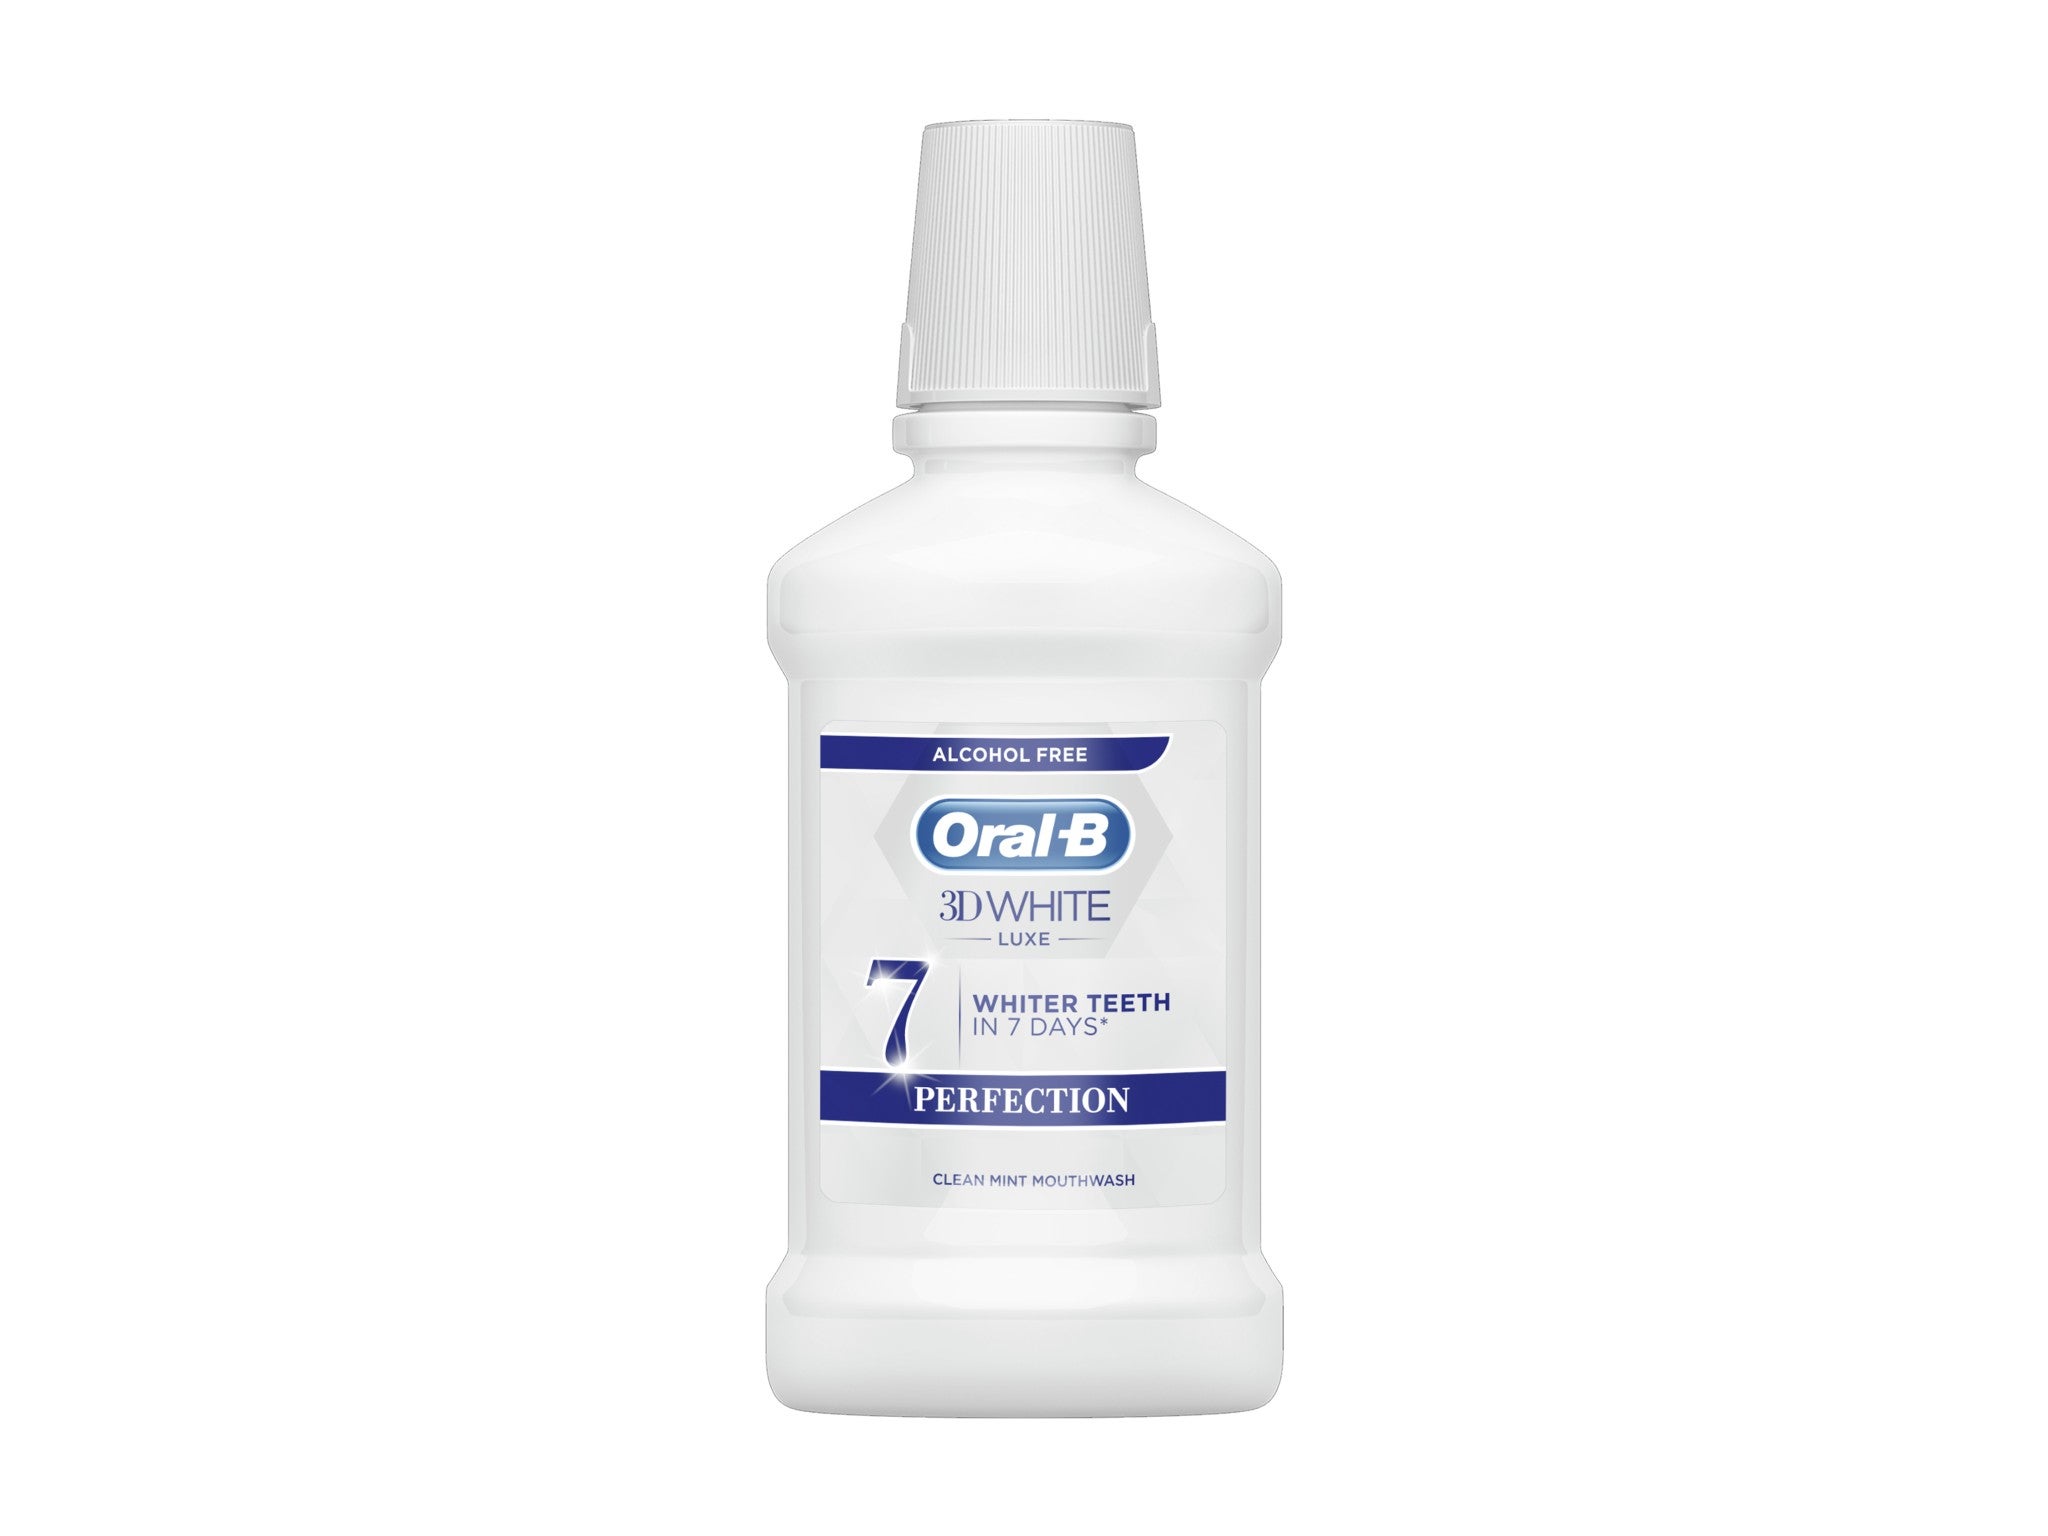 Oral-B 3D white luxe perfection mouthwash indybest.jpg